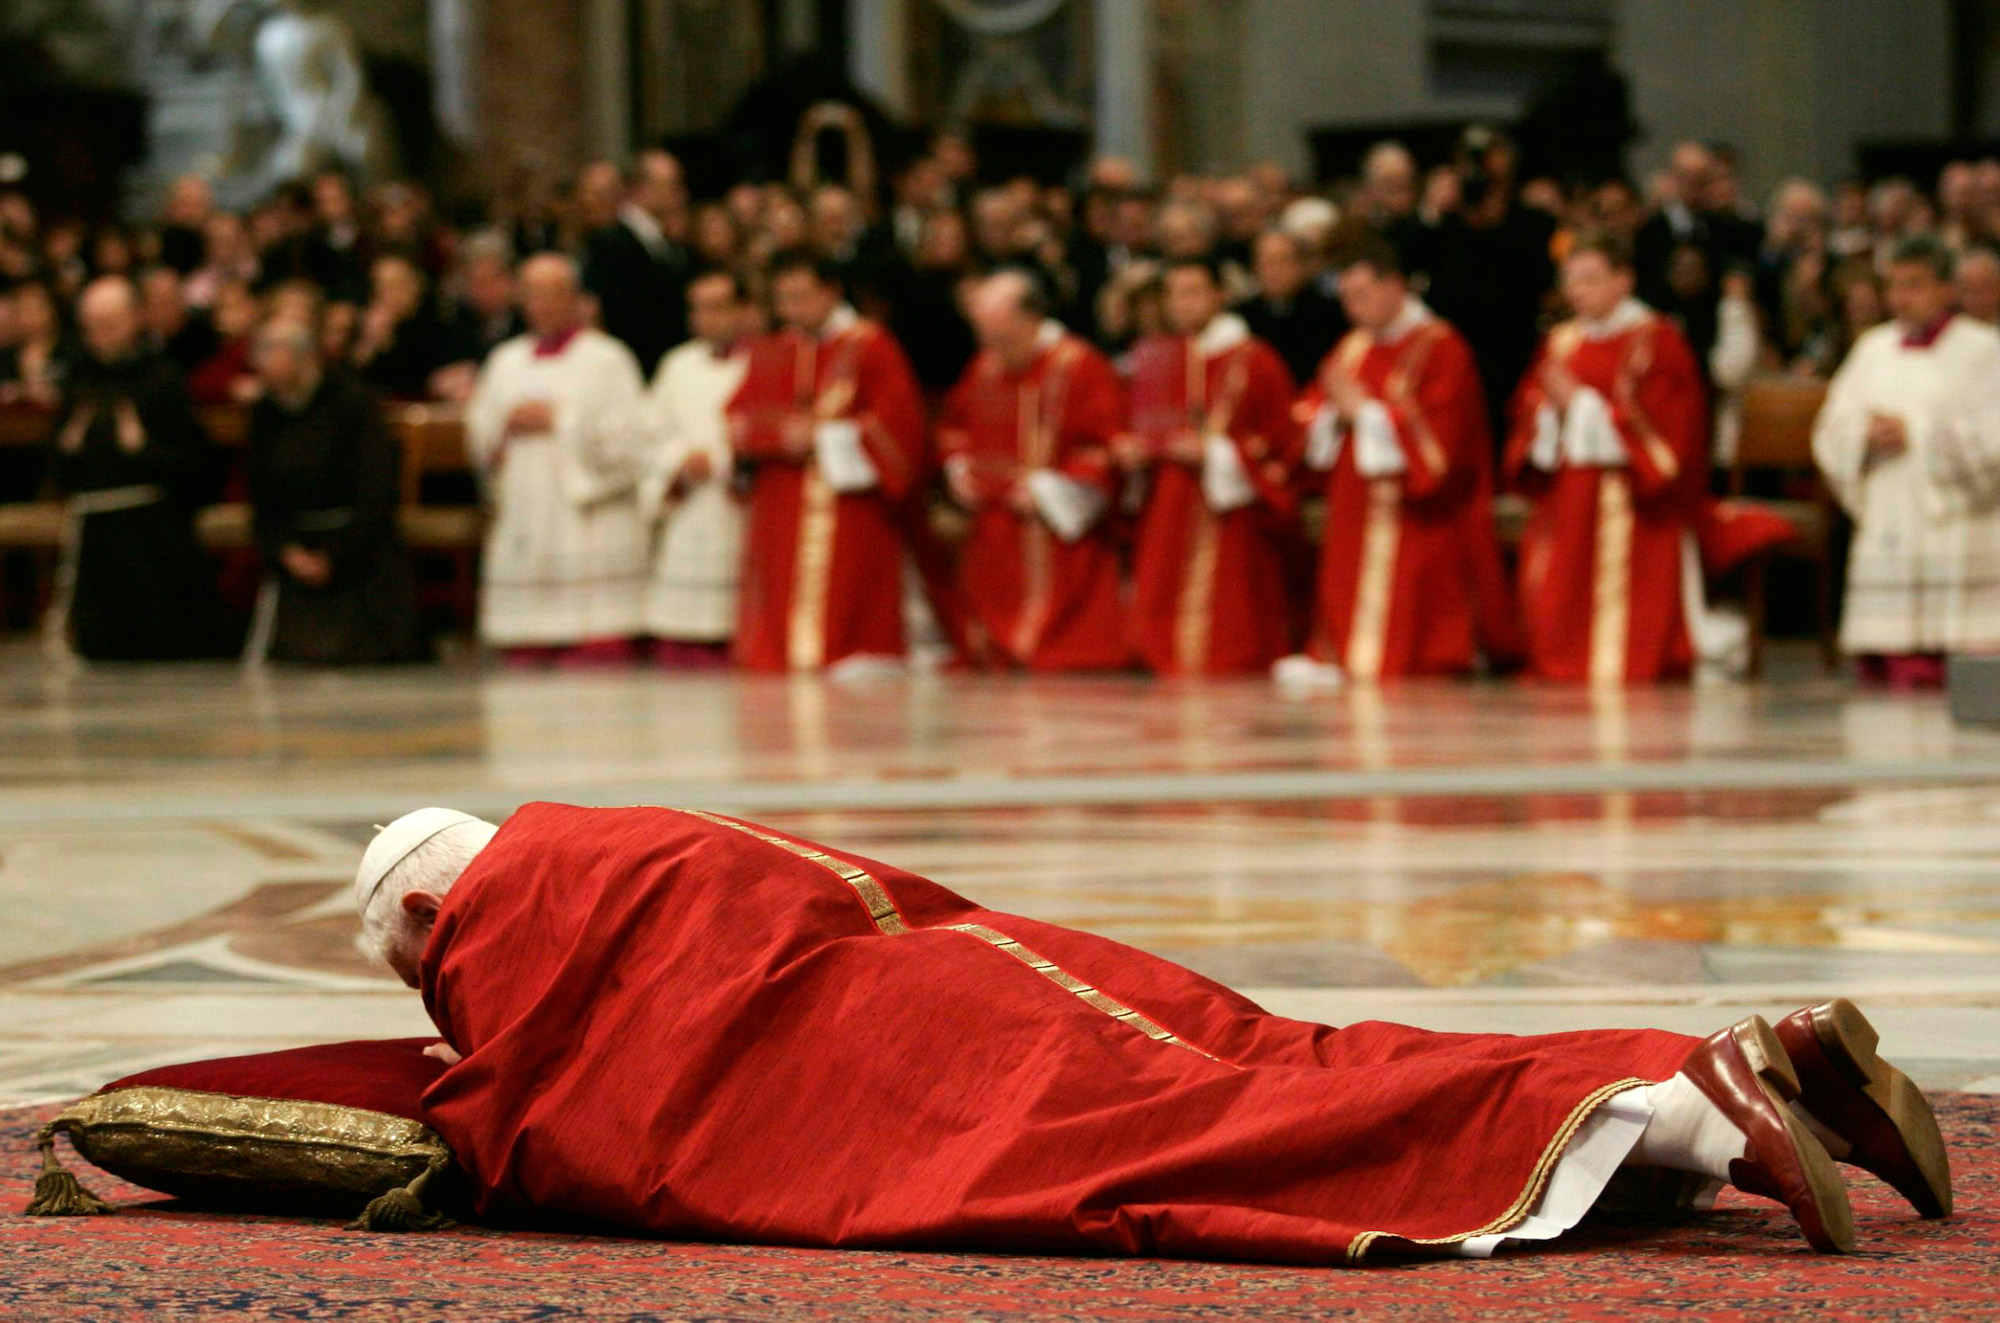 Benedict lies before the altar during a Good Friday ceremony at the Vatican in April 2007.